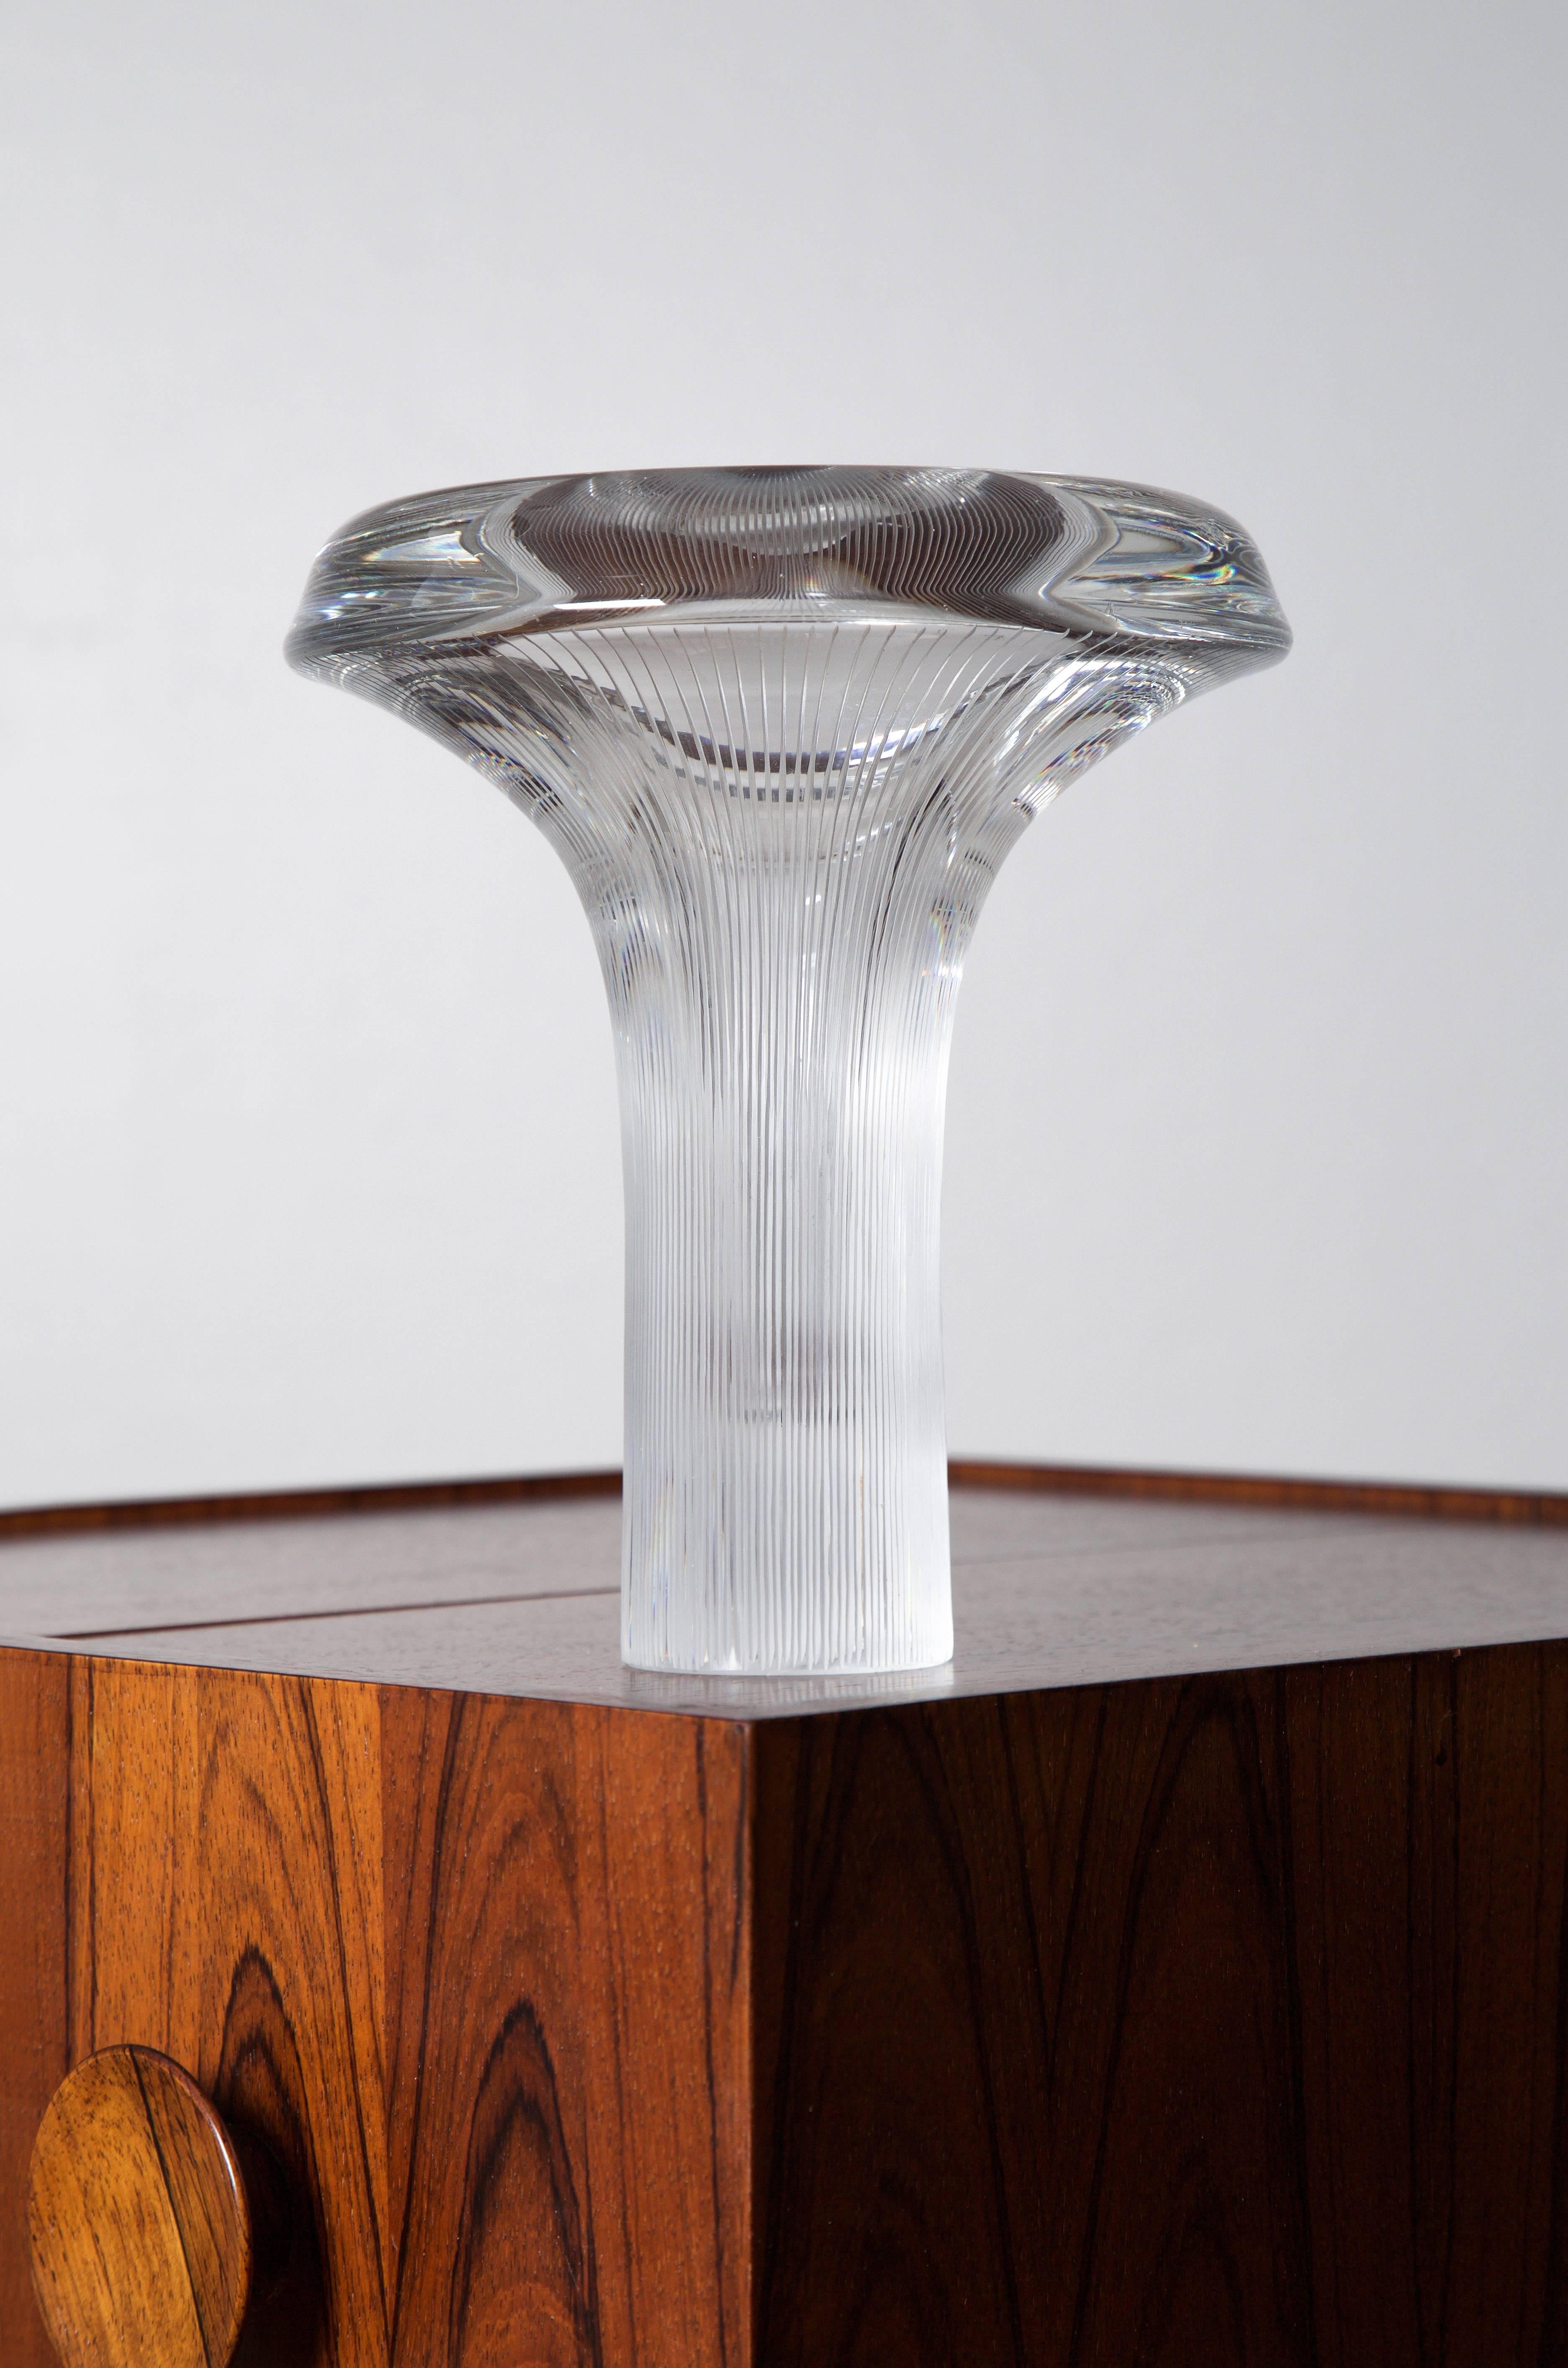 Glass art object boletus (orig. Finnish name Tatti, model No.3552) by Tapio Wirkkala. 

Finland, mid-1950s

Material mold form crystal, handmade by Iittala Glassworks

Rare large size 20.6 cm high
20.6 H x 17.8 D cm.

The model was in